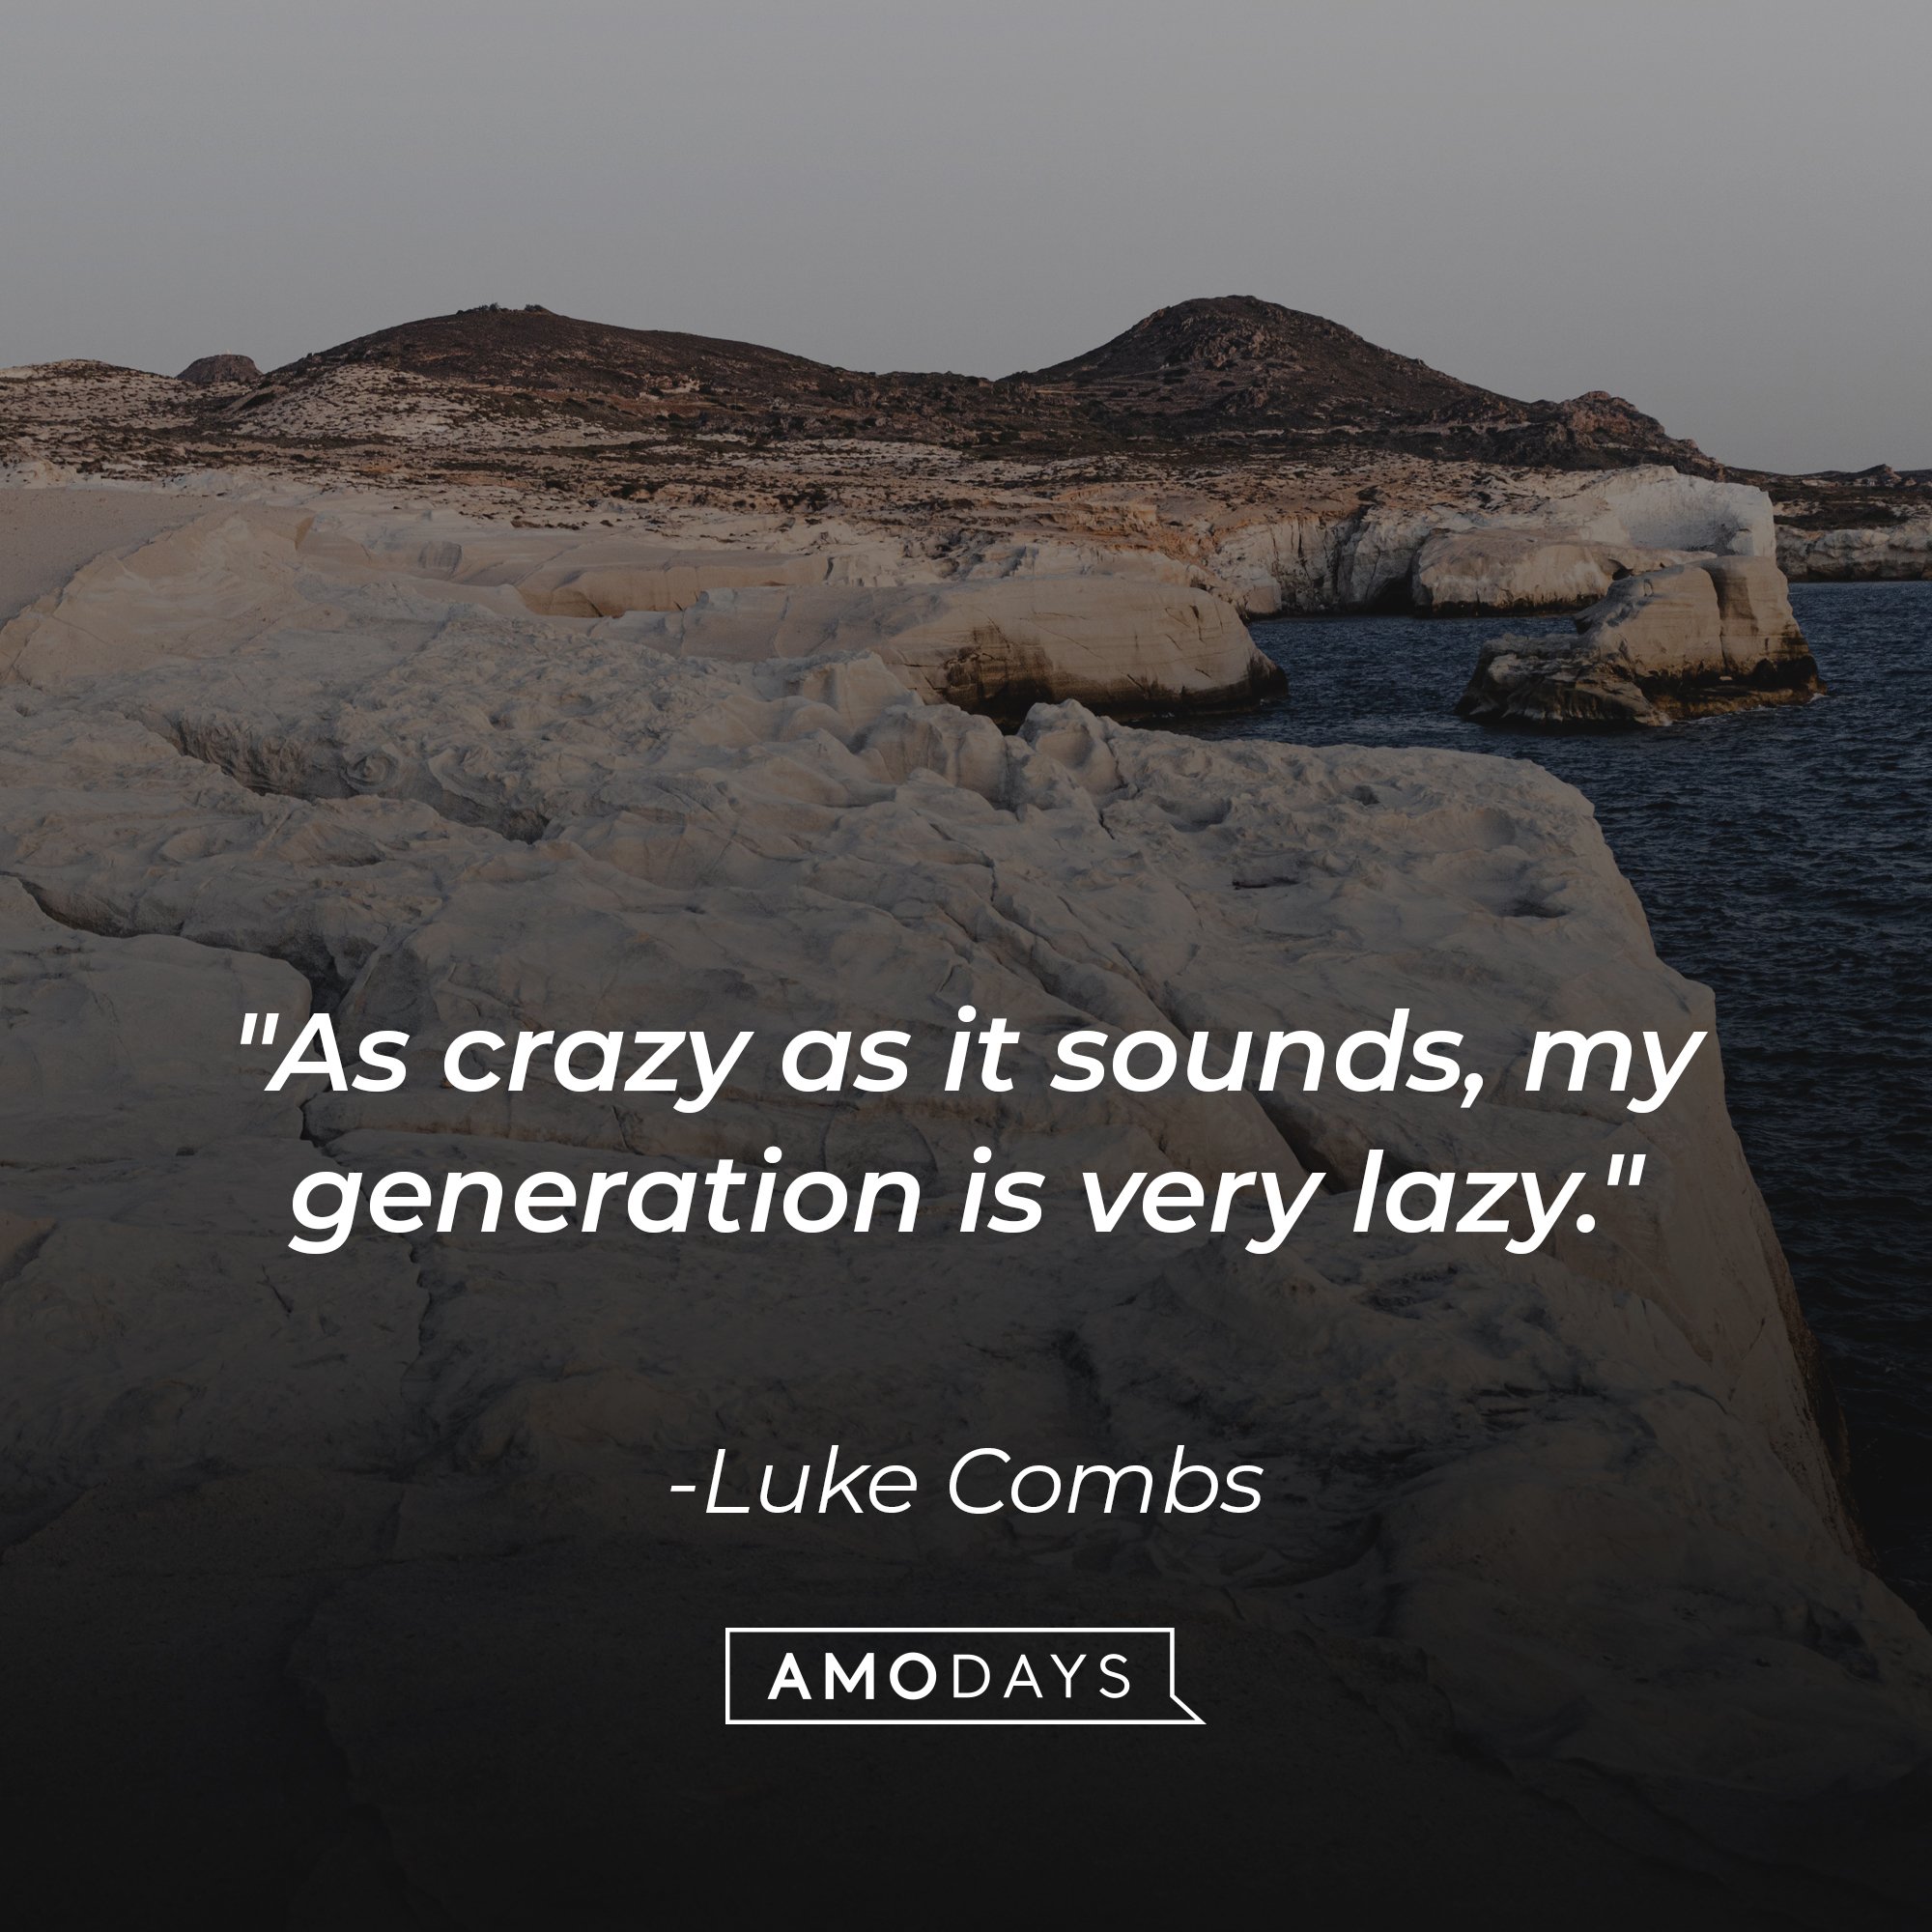 Luke Combs's quote "As crazy as it sounds, my generation is very lazy." | Source: Unsplash.com